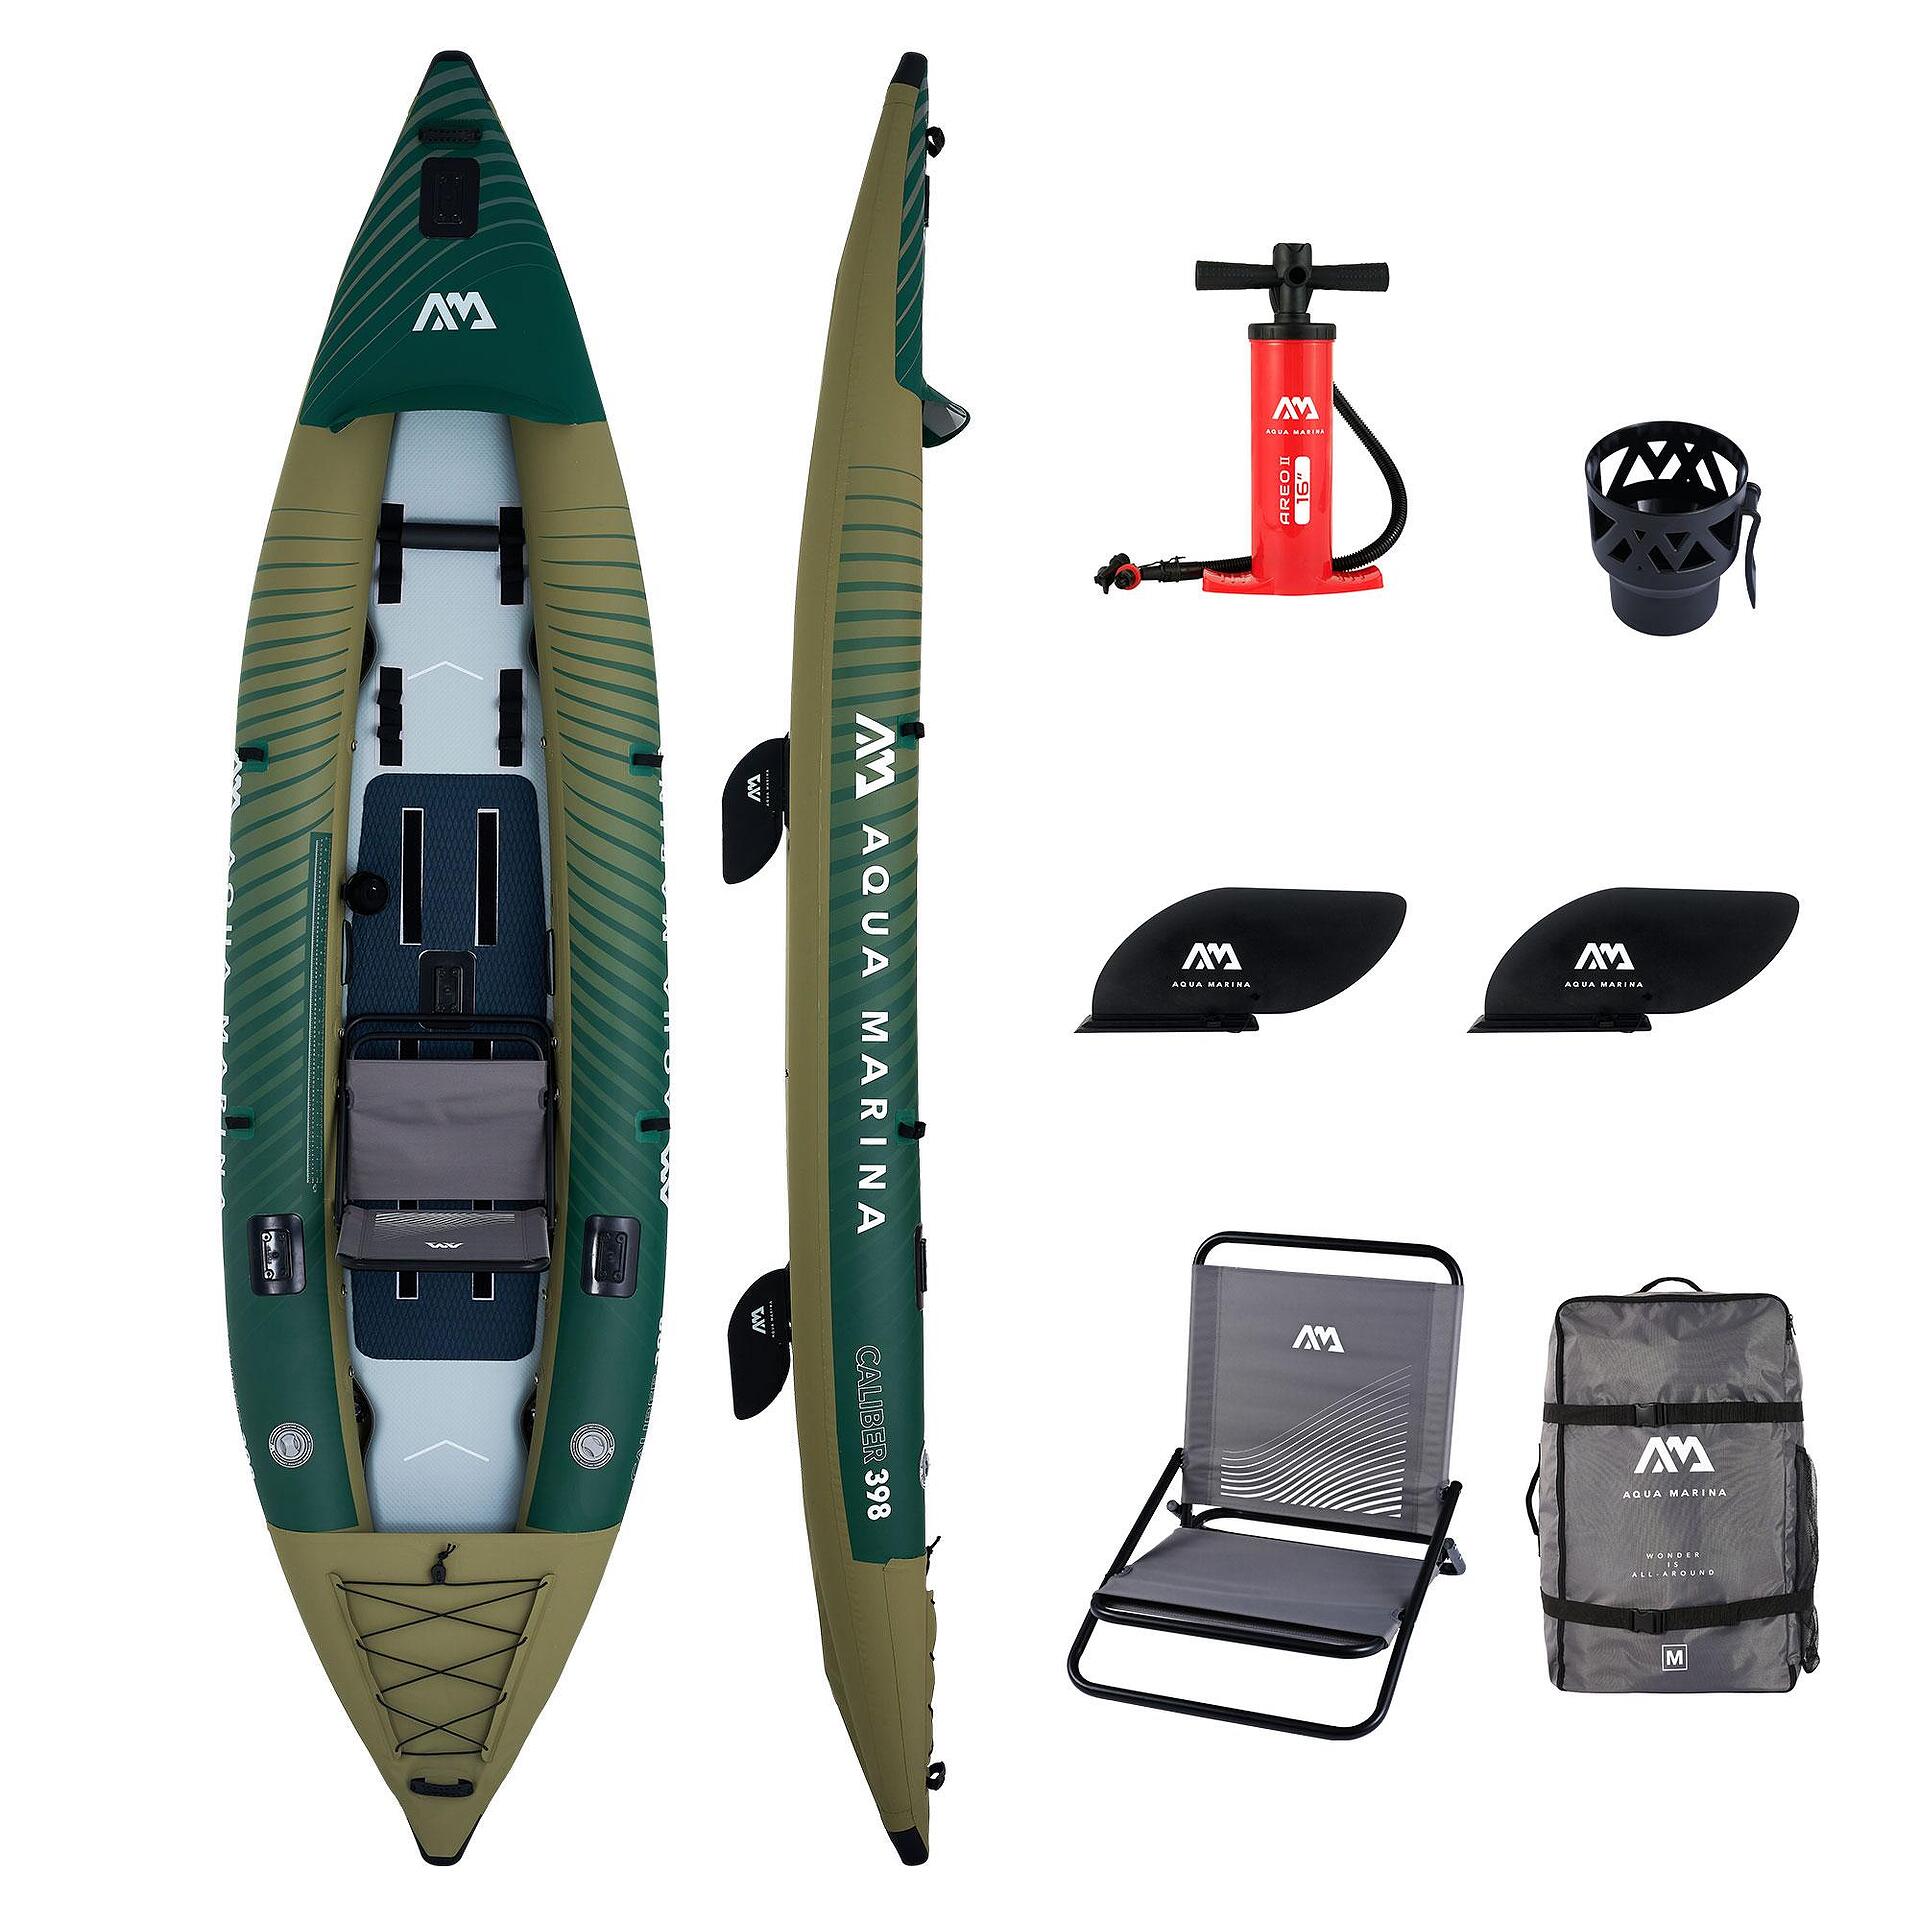 Aqua Marina - Caliber Angling Kayak 1/2-person. DWF Deck. Foldable fishing  seat x1, Cup holder. (paddle excluded)